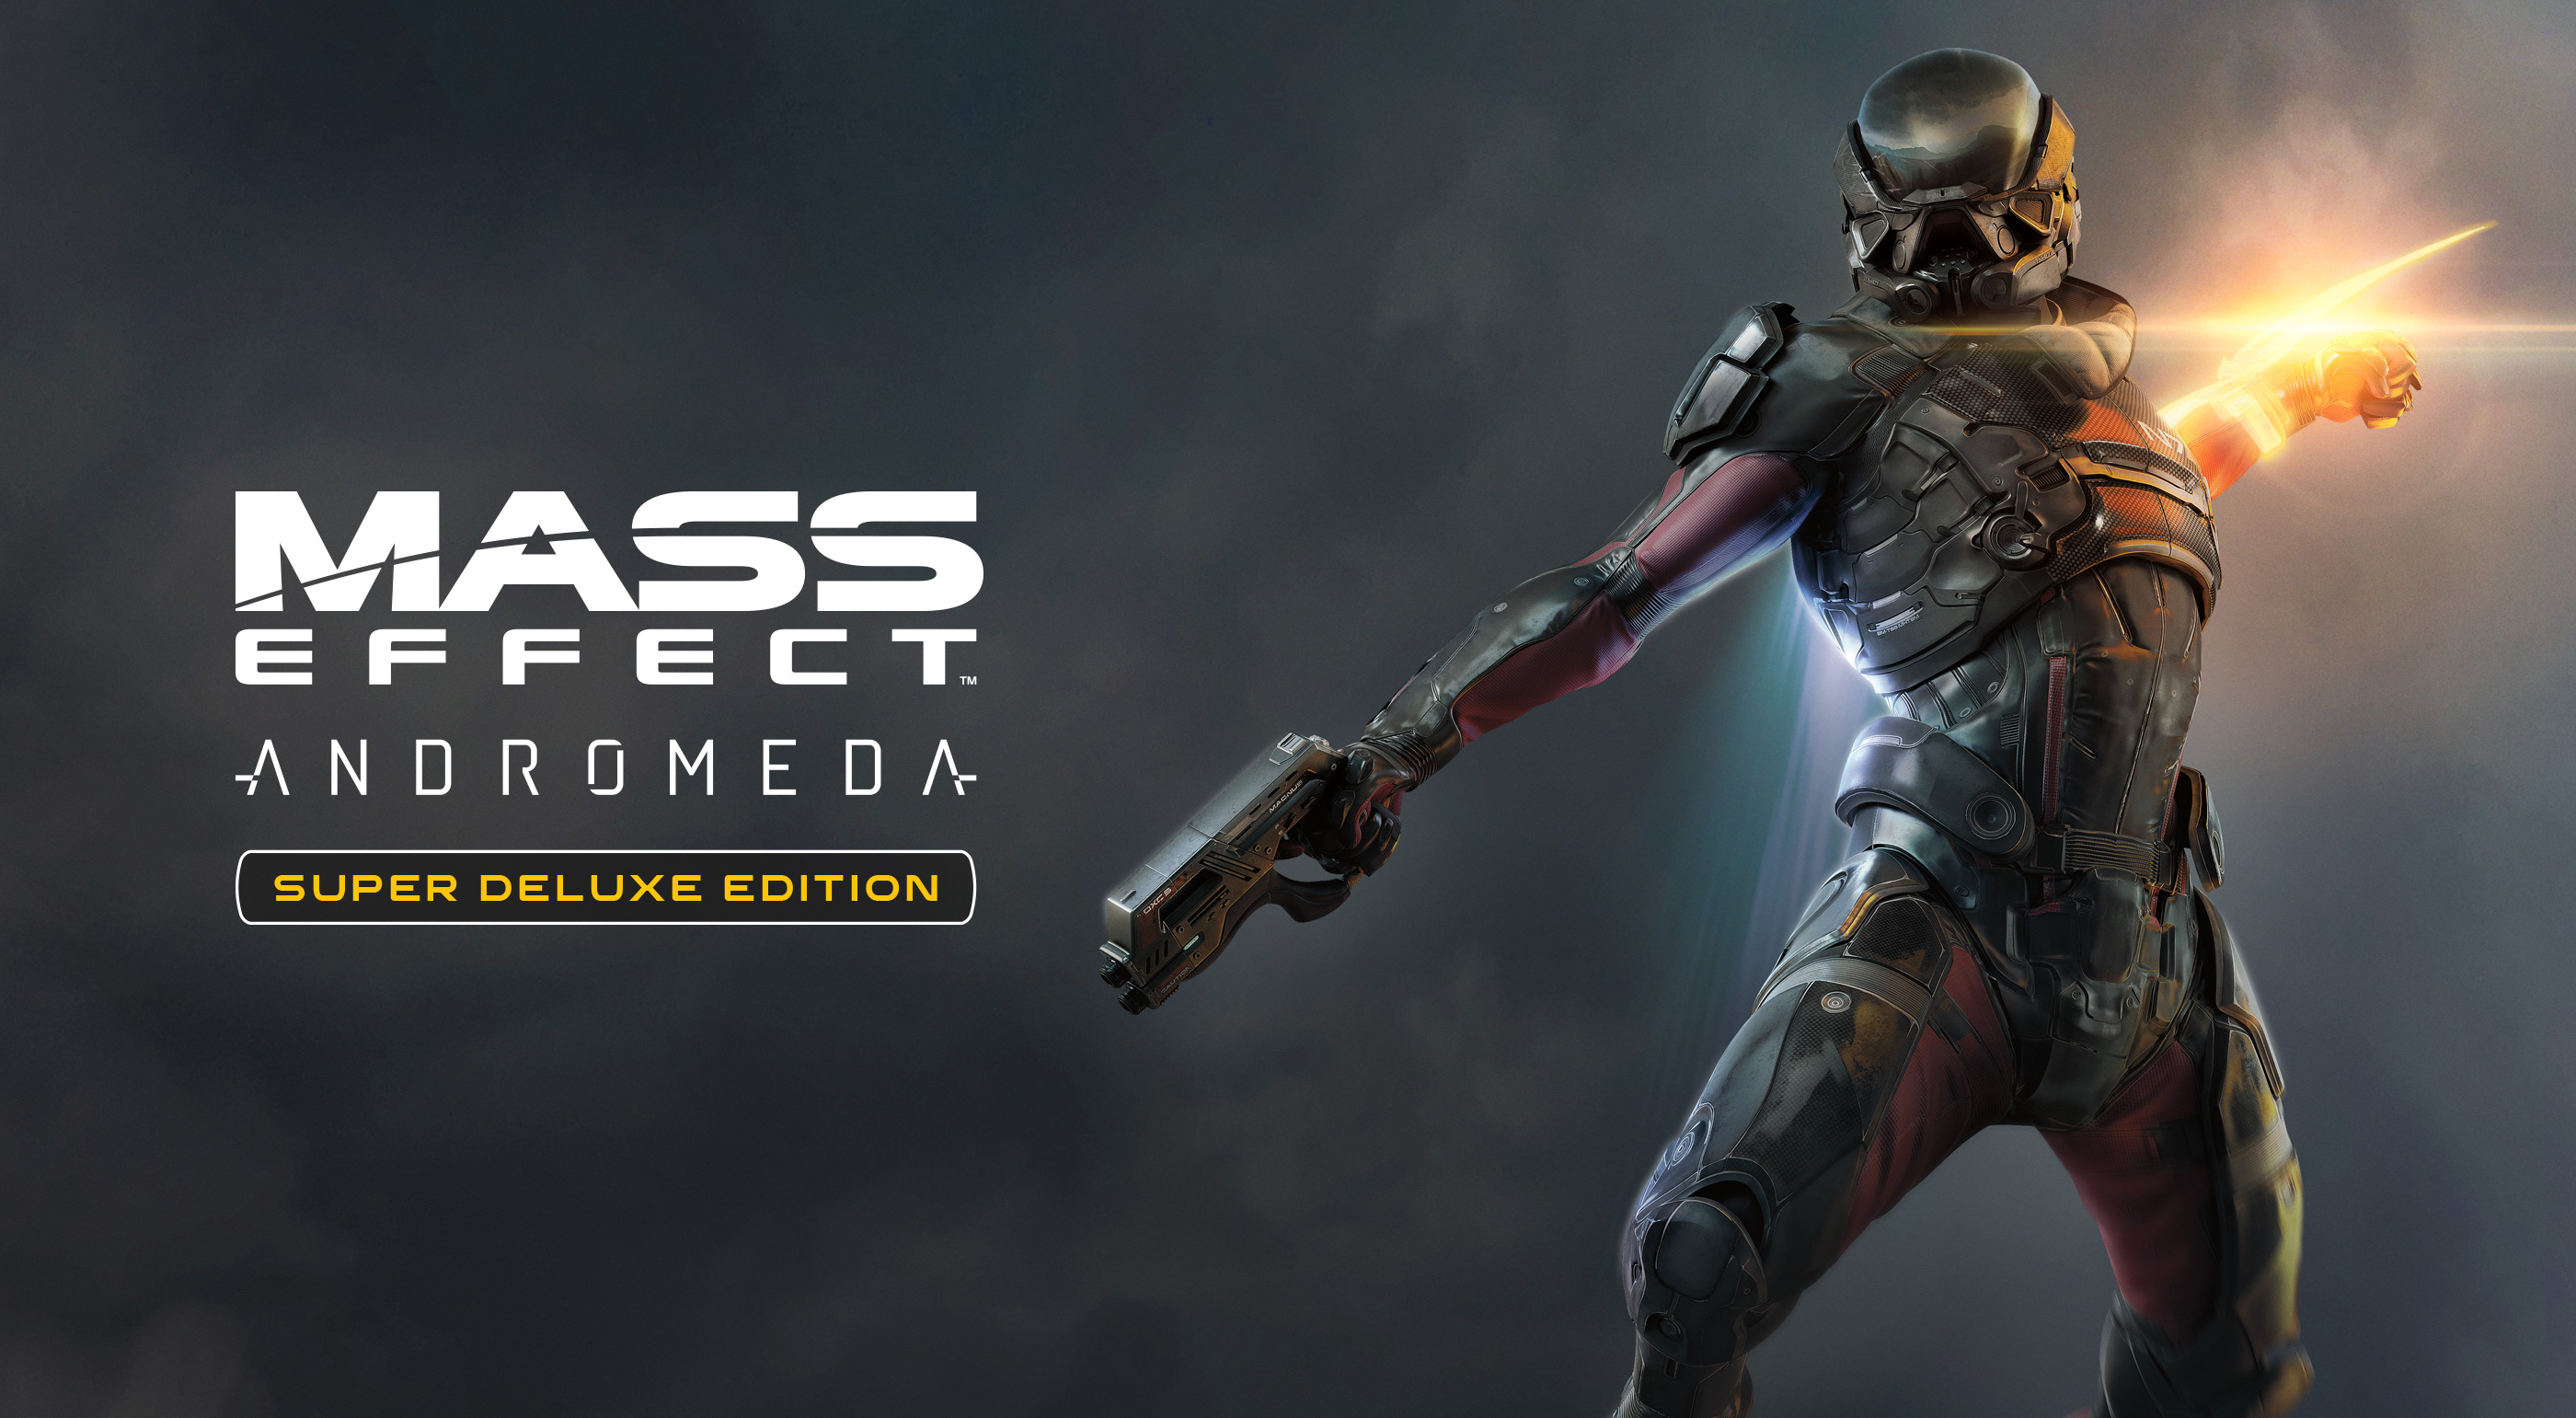 obtaining using mass effect andromeda deluxe edition items